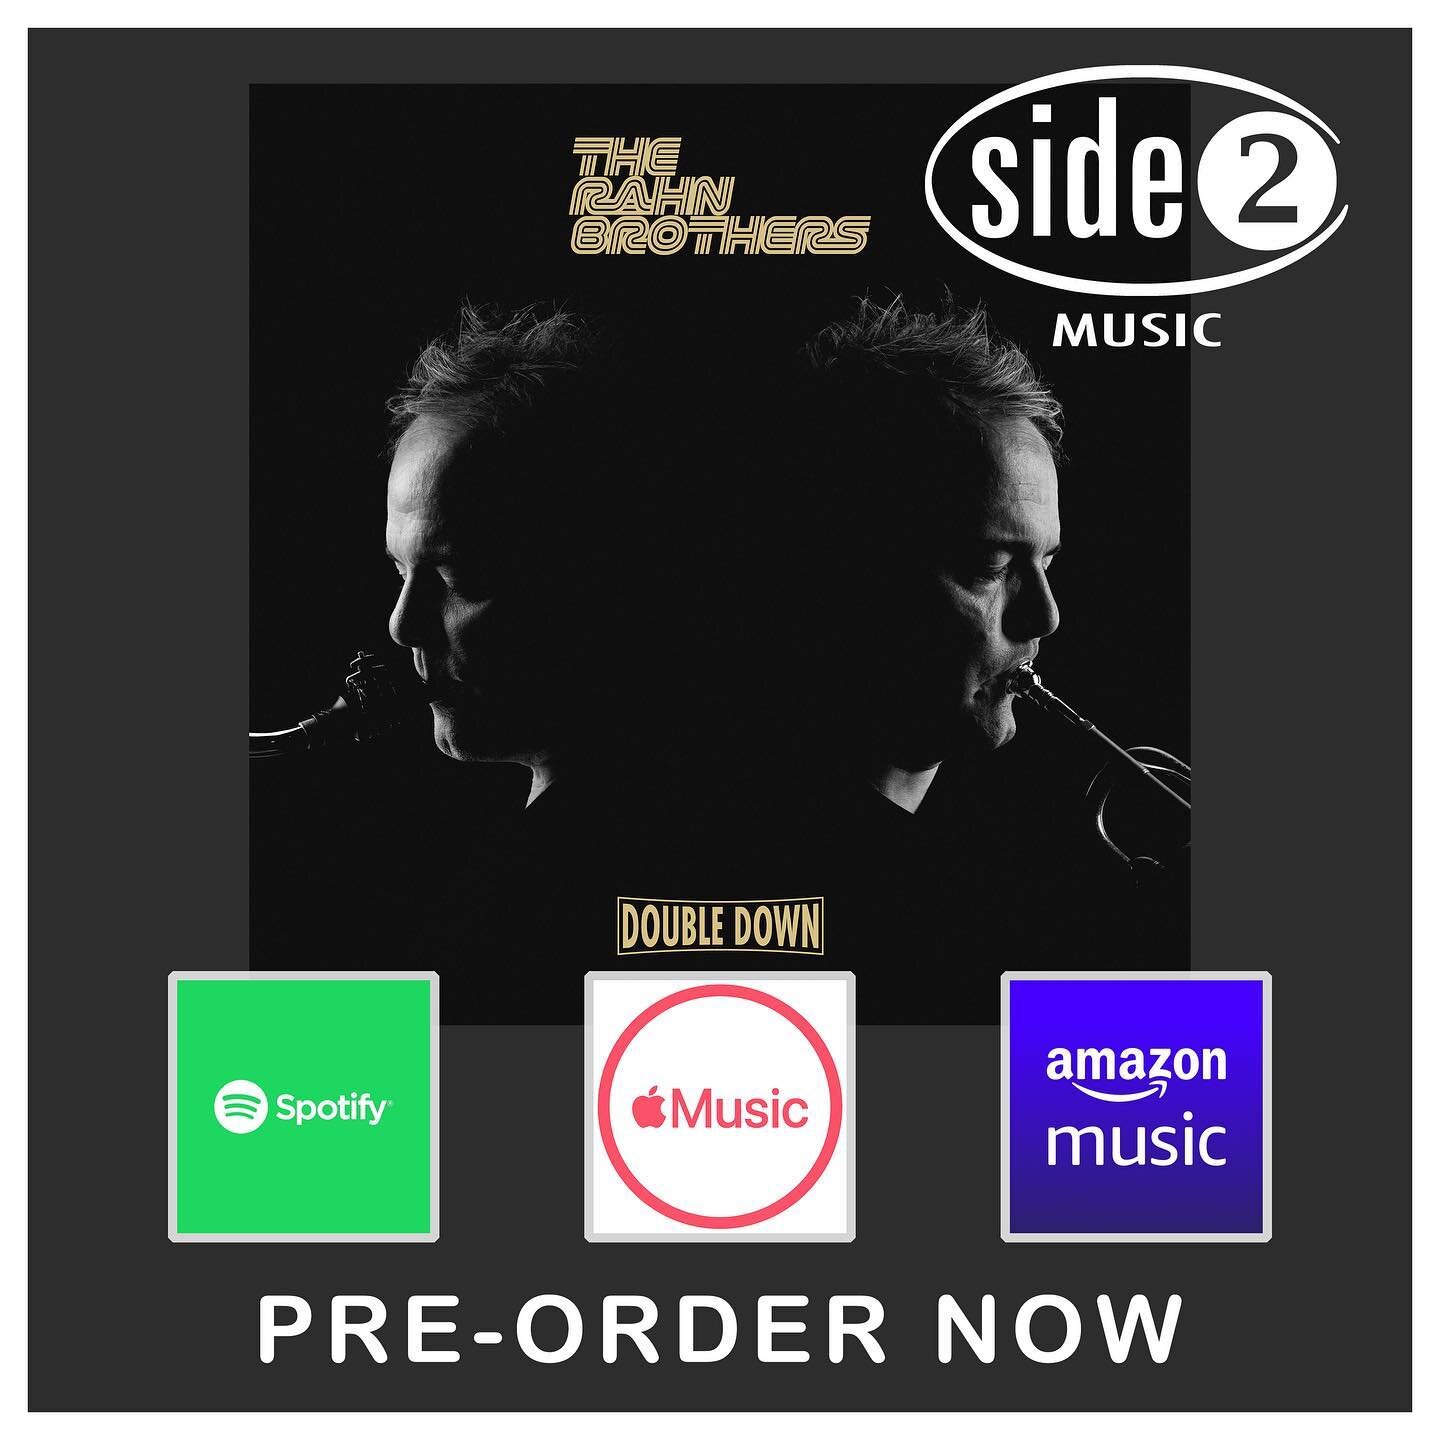 You can Pre-Order/Pre-Save the upcoming Rahn Brothers single now! It will be available worldwide on June 2nd and goes for adds at radio on June 5th. Get ready to &rdquo;DOUBLE DOWN&rdquo; with @therahnbrothers and @side2music 🎷🎺 

https://distrokid